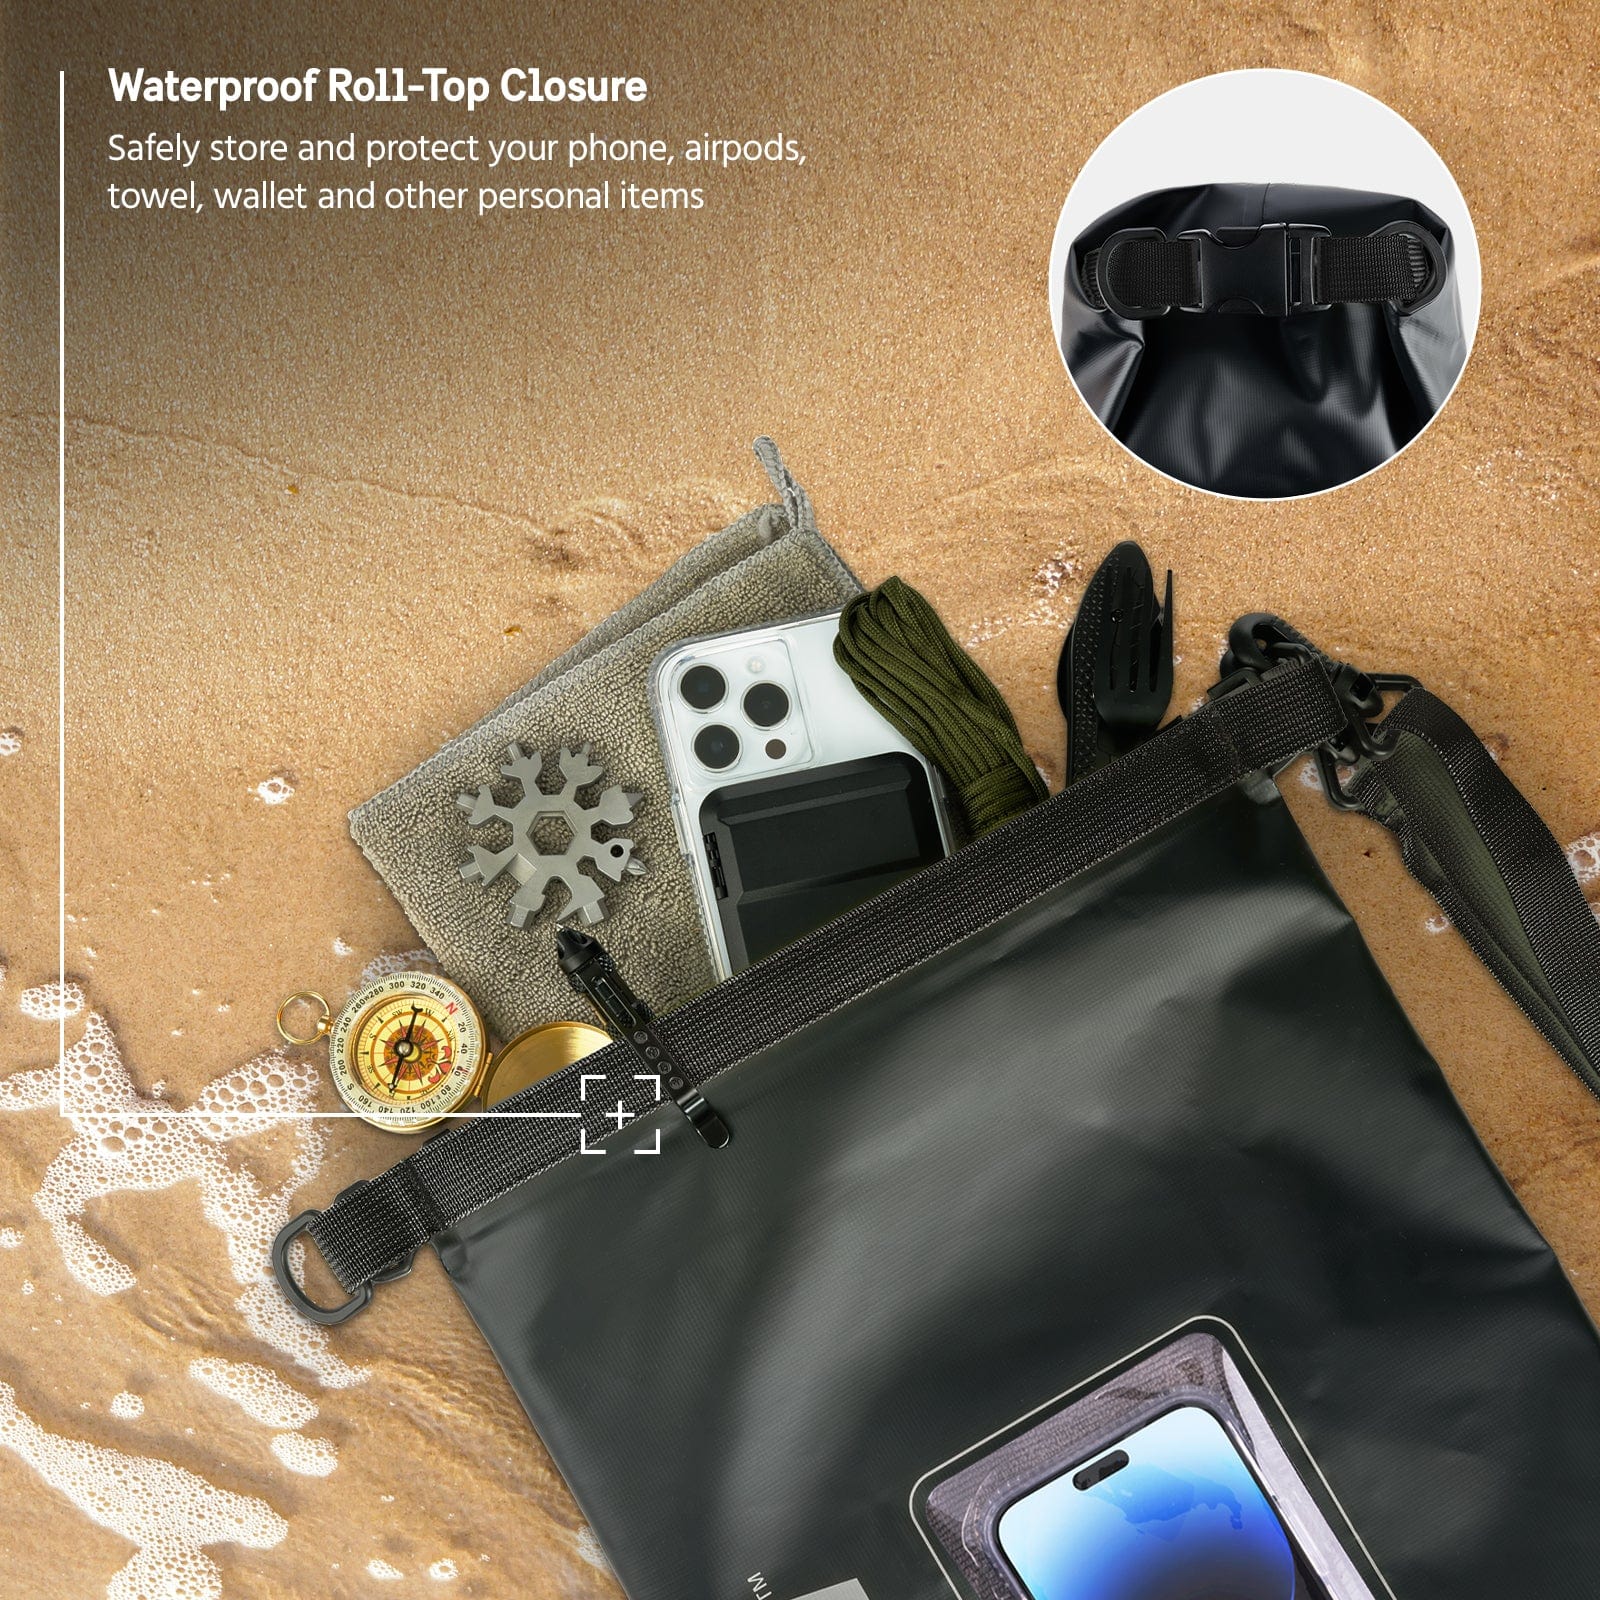 Waterproof Roll Top Closure. Safely store and protect your phone, airpods, towel. wallet, and other personal items.